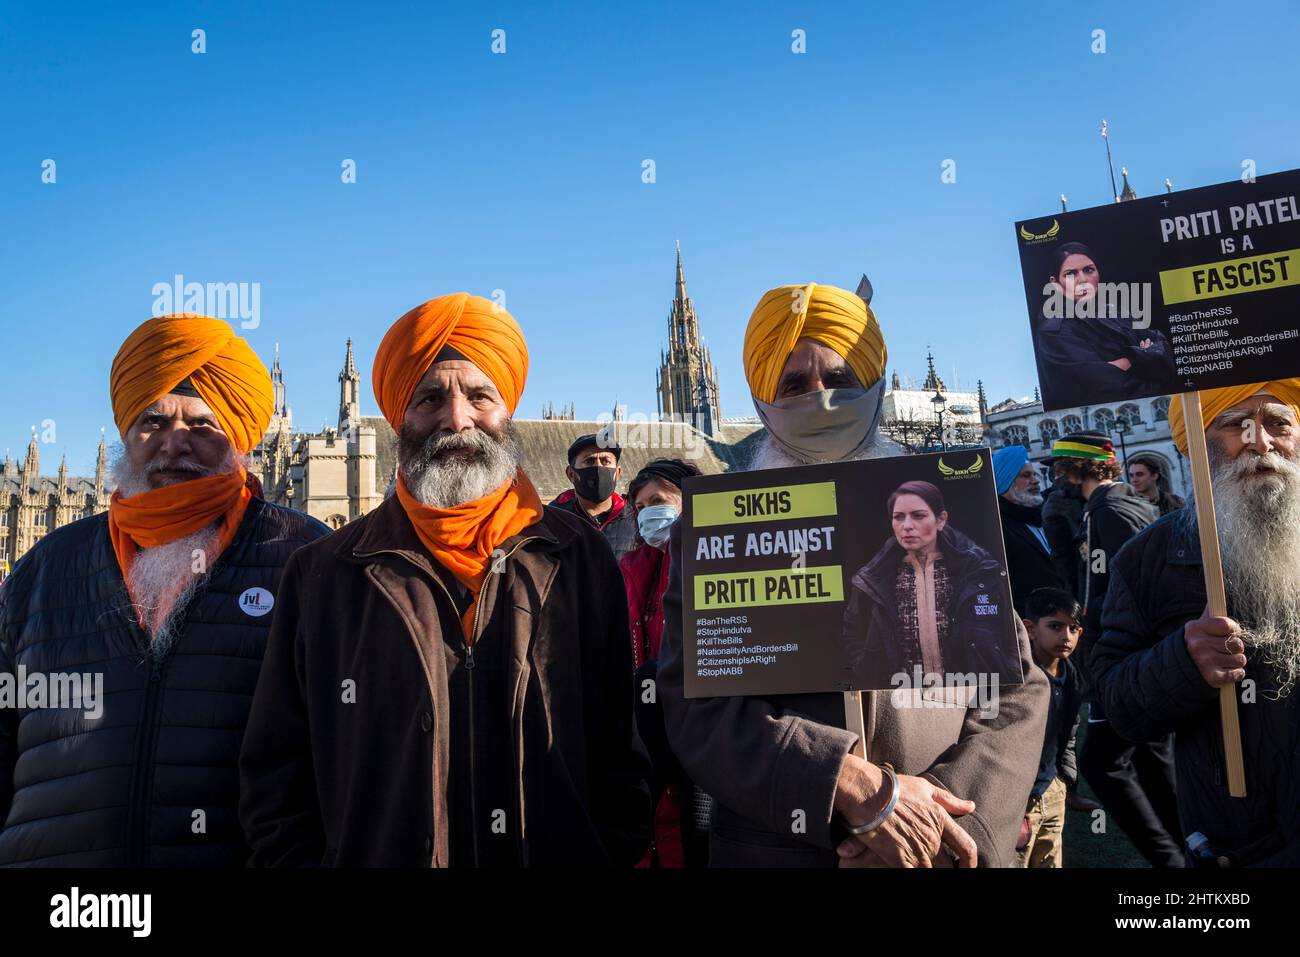 Sikh Protestors holding placards against Priti Patel and the Nationality and Borders Bill, Parliament Square, London, UK, 27th February 2022 Stock Photo